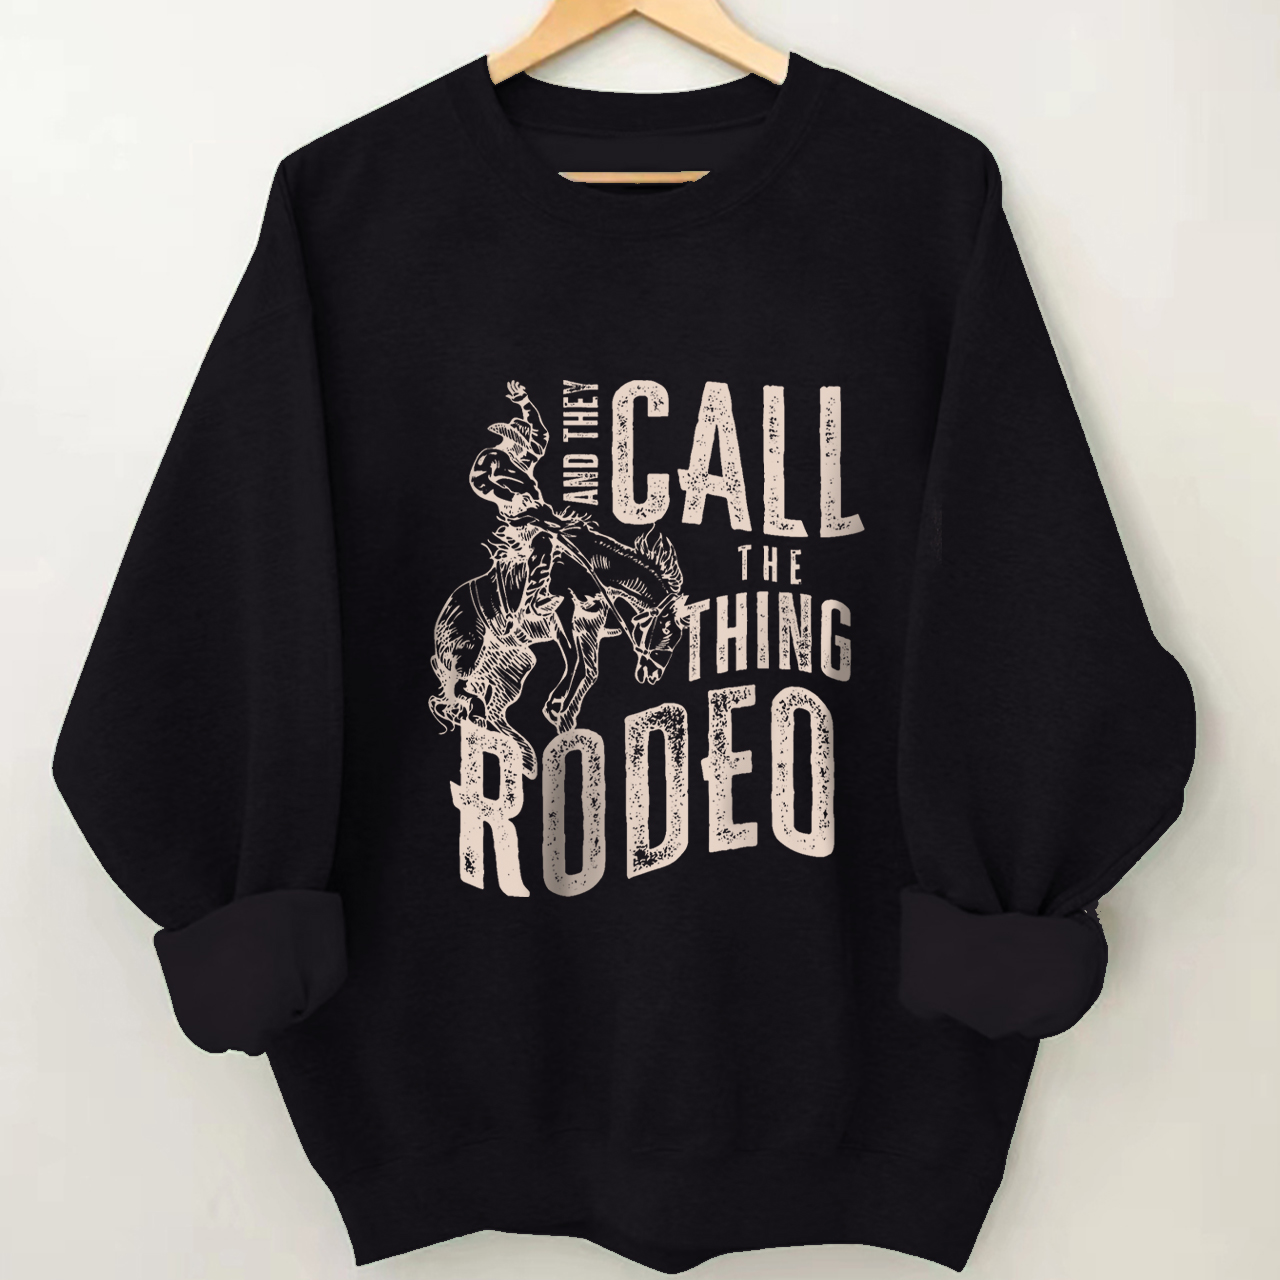 And They Call The Thing Rodeo Sweatshirt